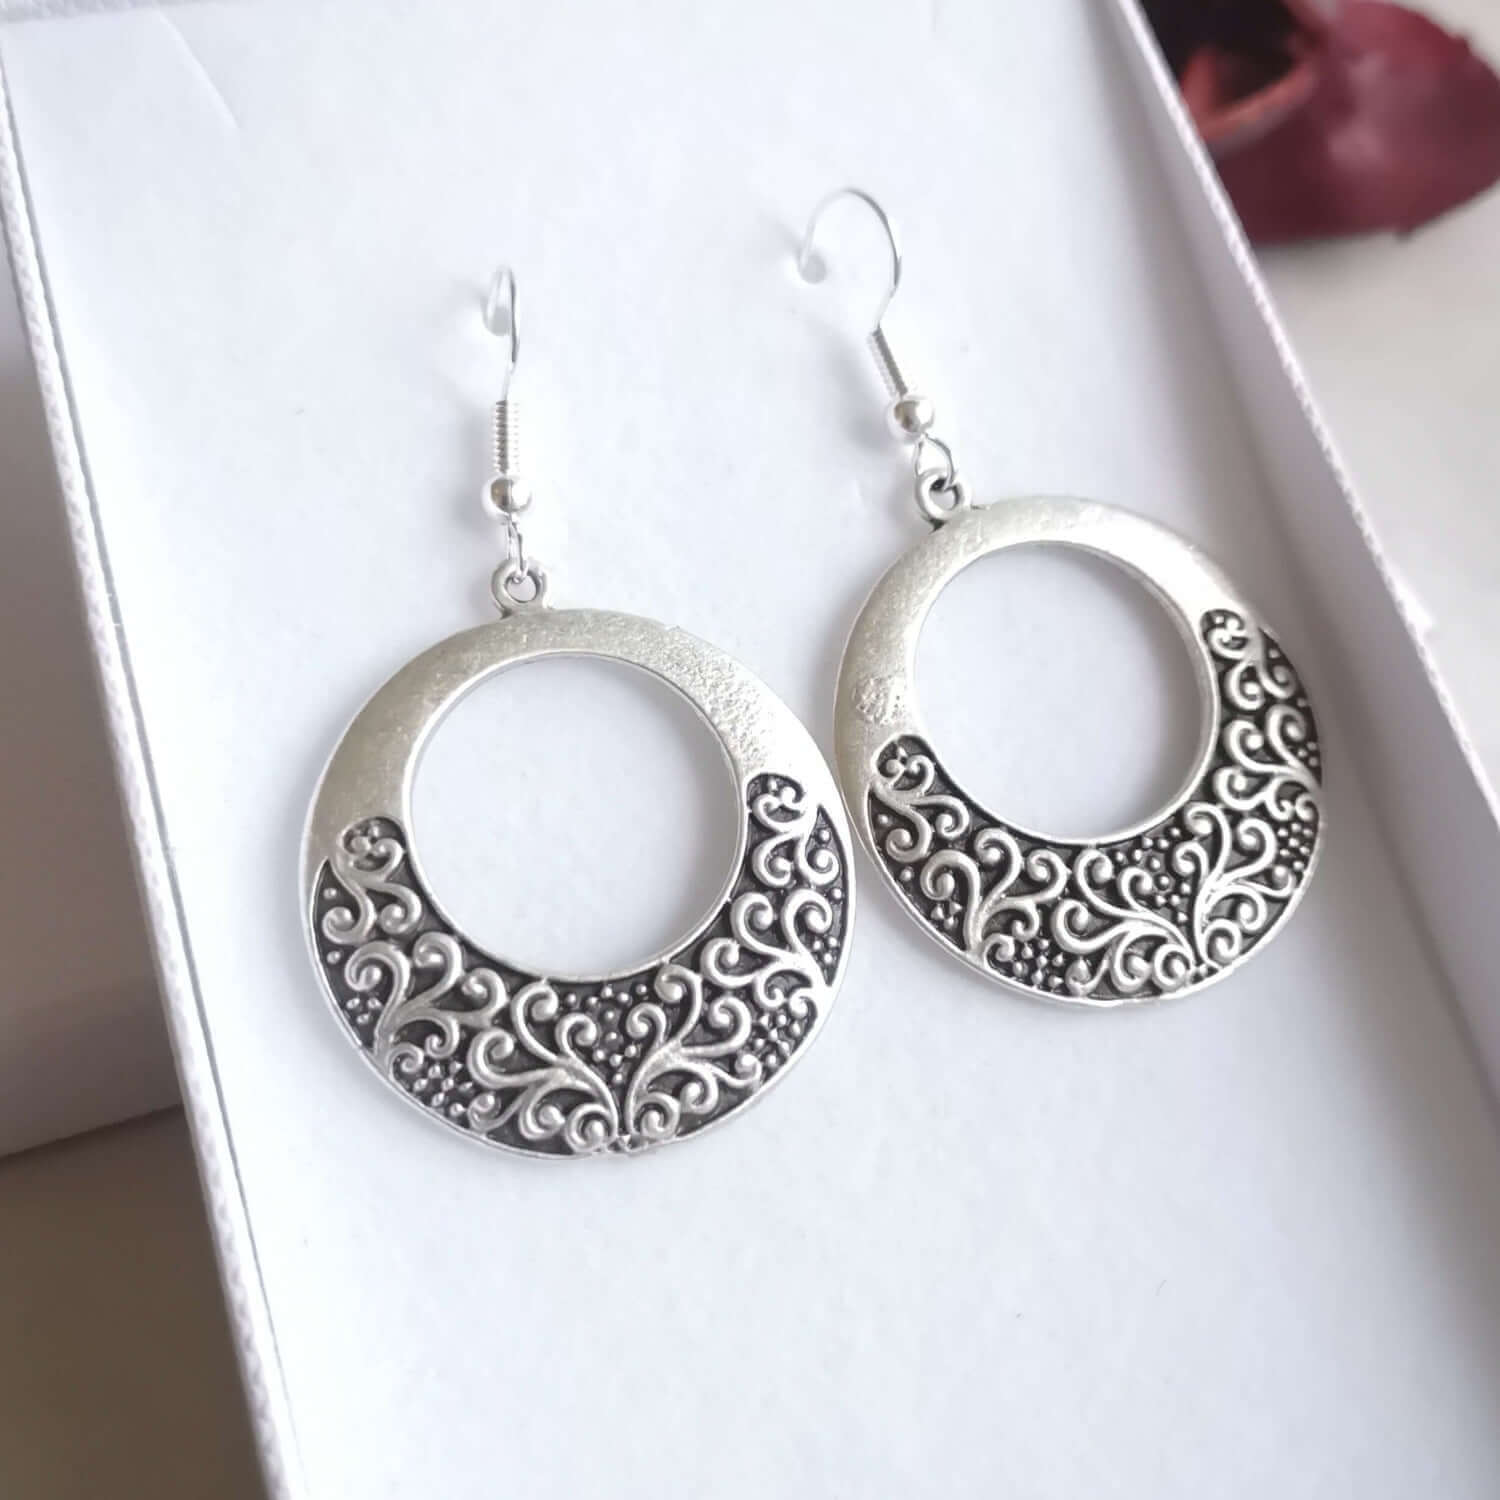 Boho silver round earrings in a gift box